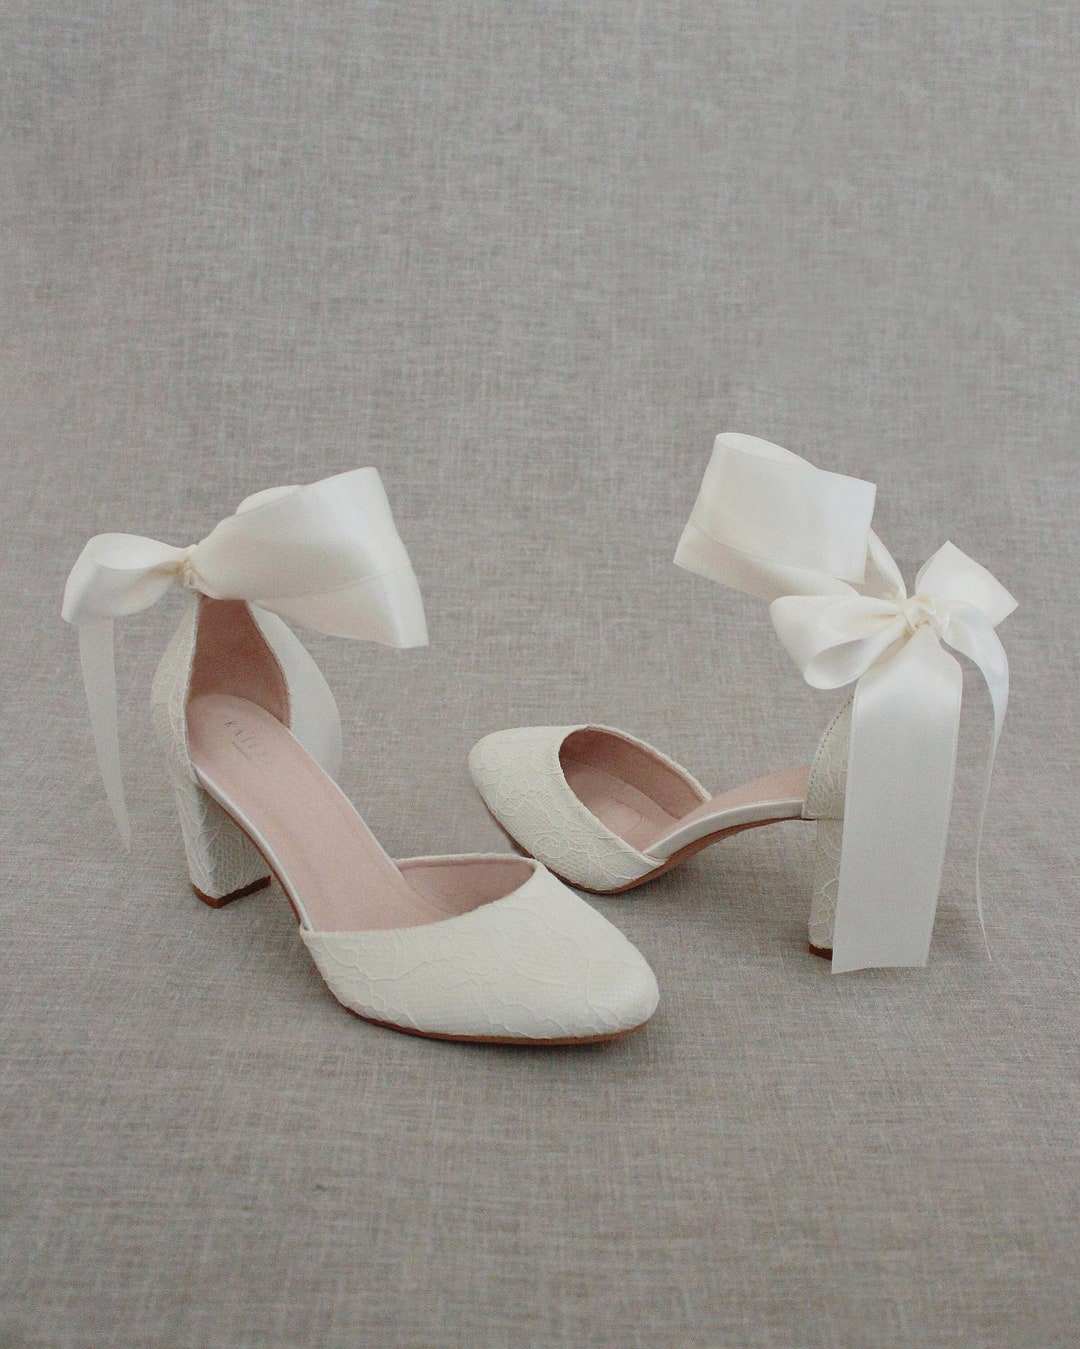 Ivory Lace Block Heel With WRAPPED SATIN TIE, Women Wedding Shoes ...